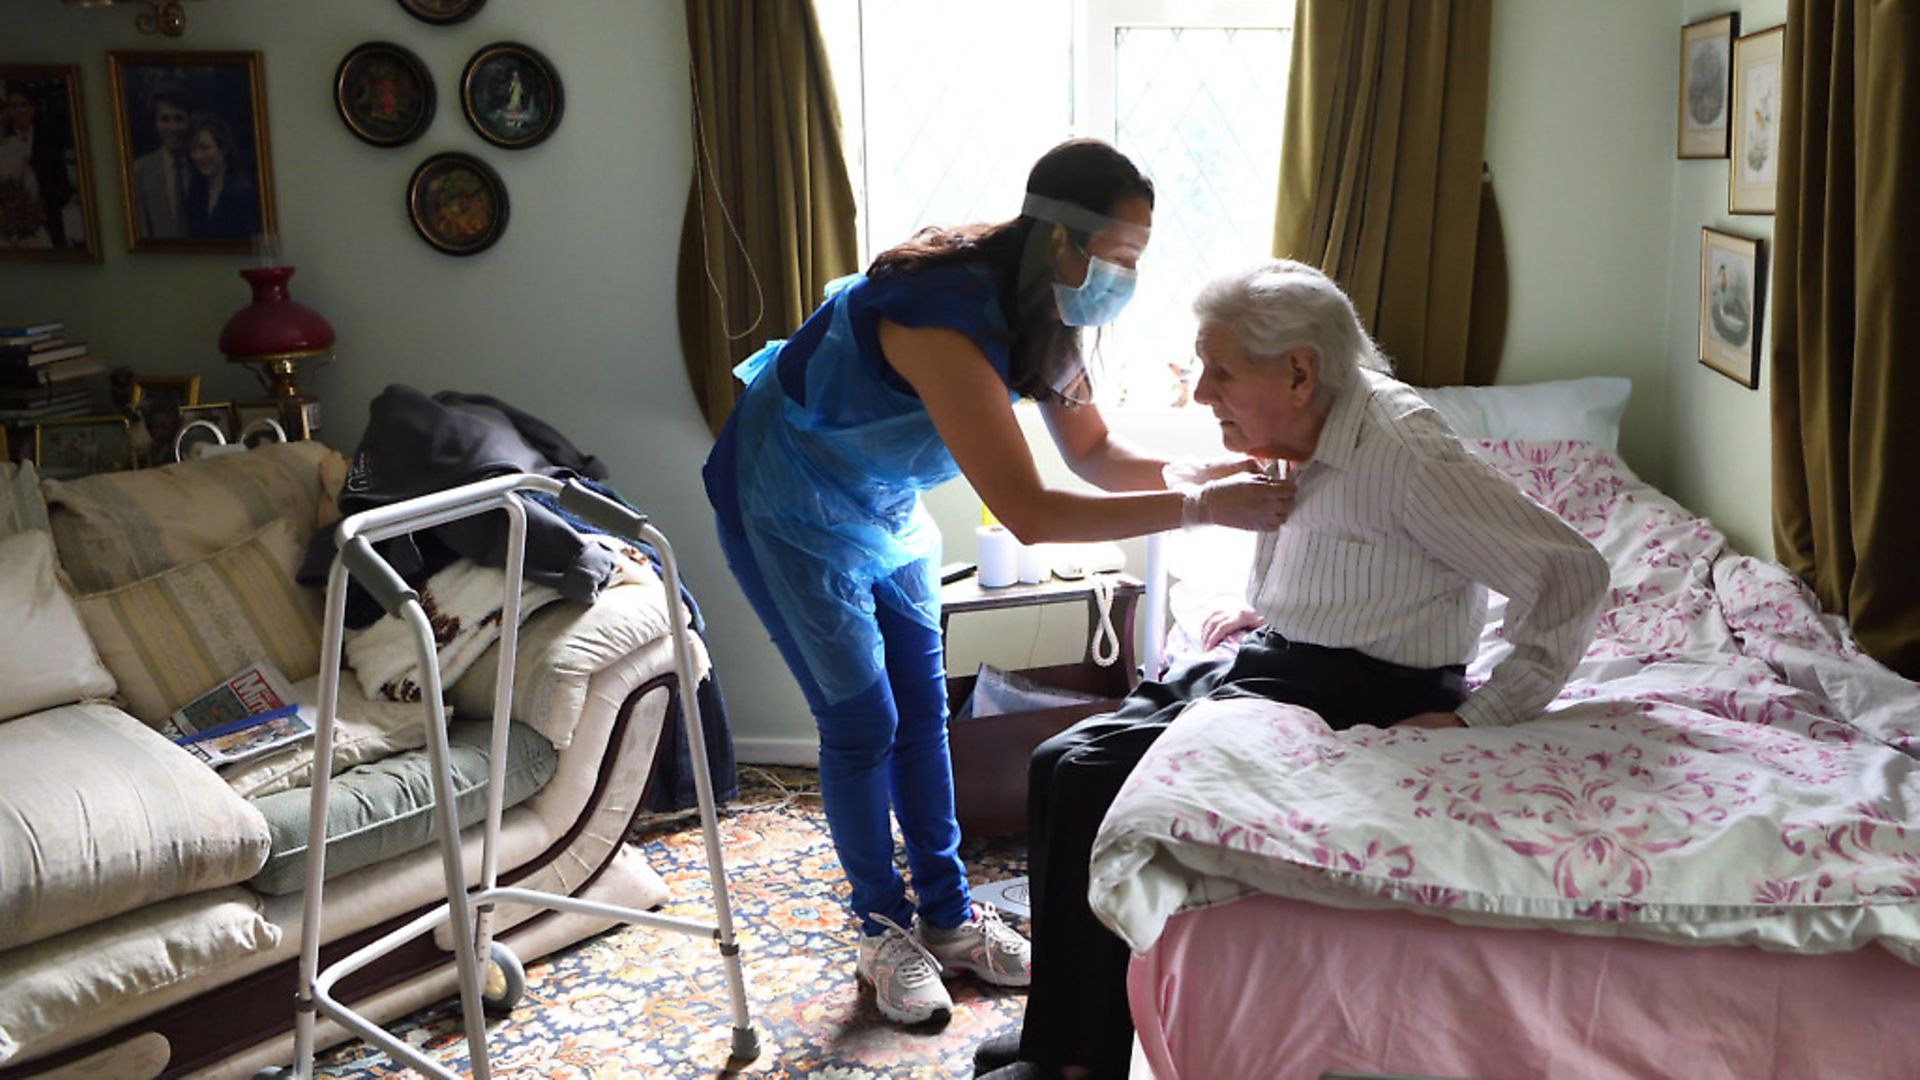 Careworker Fabiana Connors visits client Jack Hornsby at his home during the coronavirus pandemic in Elstree, England. Fabiana Connors continues to work during the coronavirus pandemic, visiting clients in their own homes to help with daily personal care routines. Photo: Karwai Tang/Getty Images - Credit: Getty Images